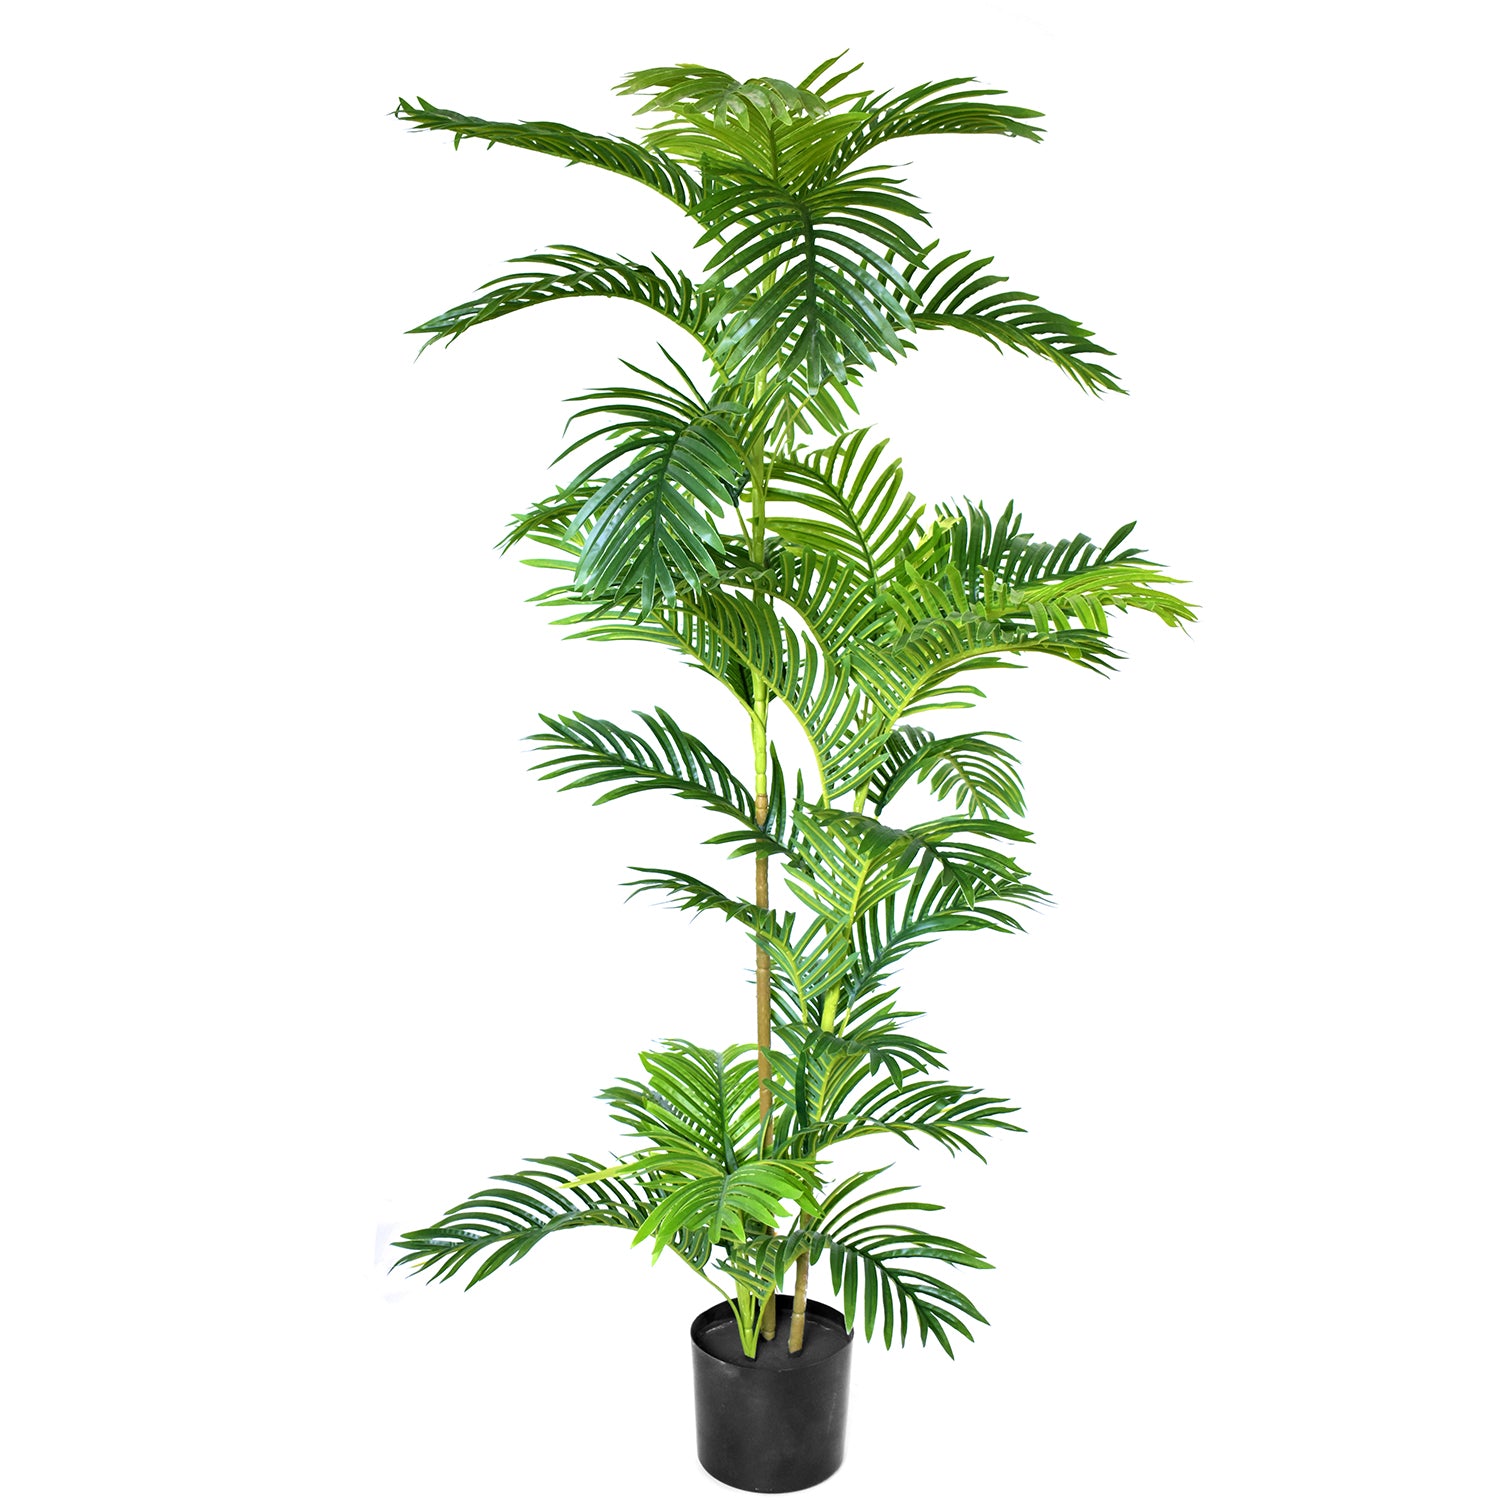 Aavana Greens Decorative Artificial Large Palm Plants Pack Of 1